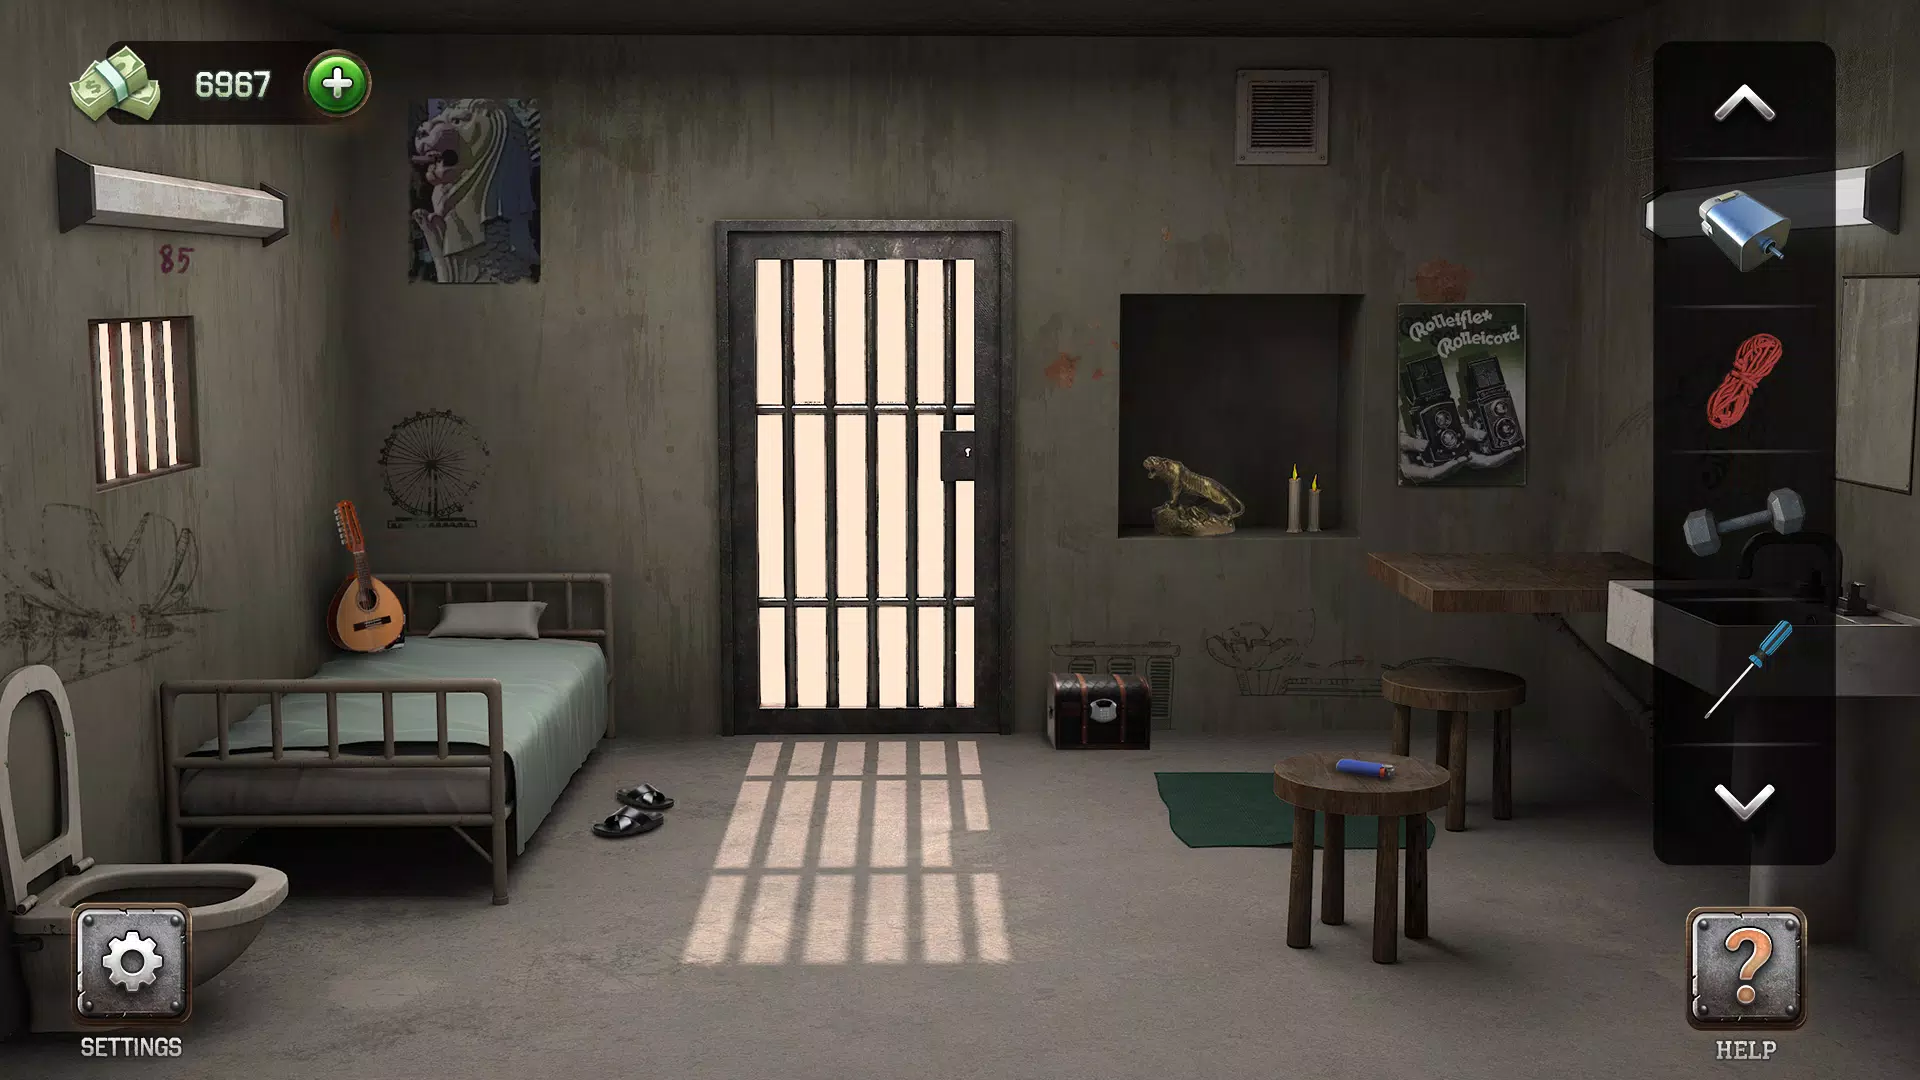 100 Doors - Escape from Prison Mod APK (Free Shopping) 2.9.7 Download